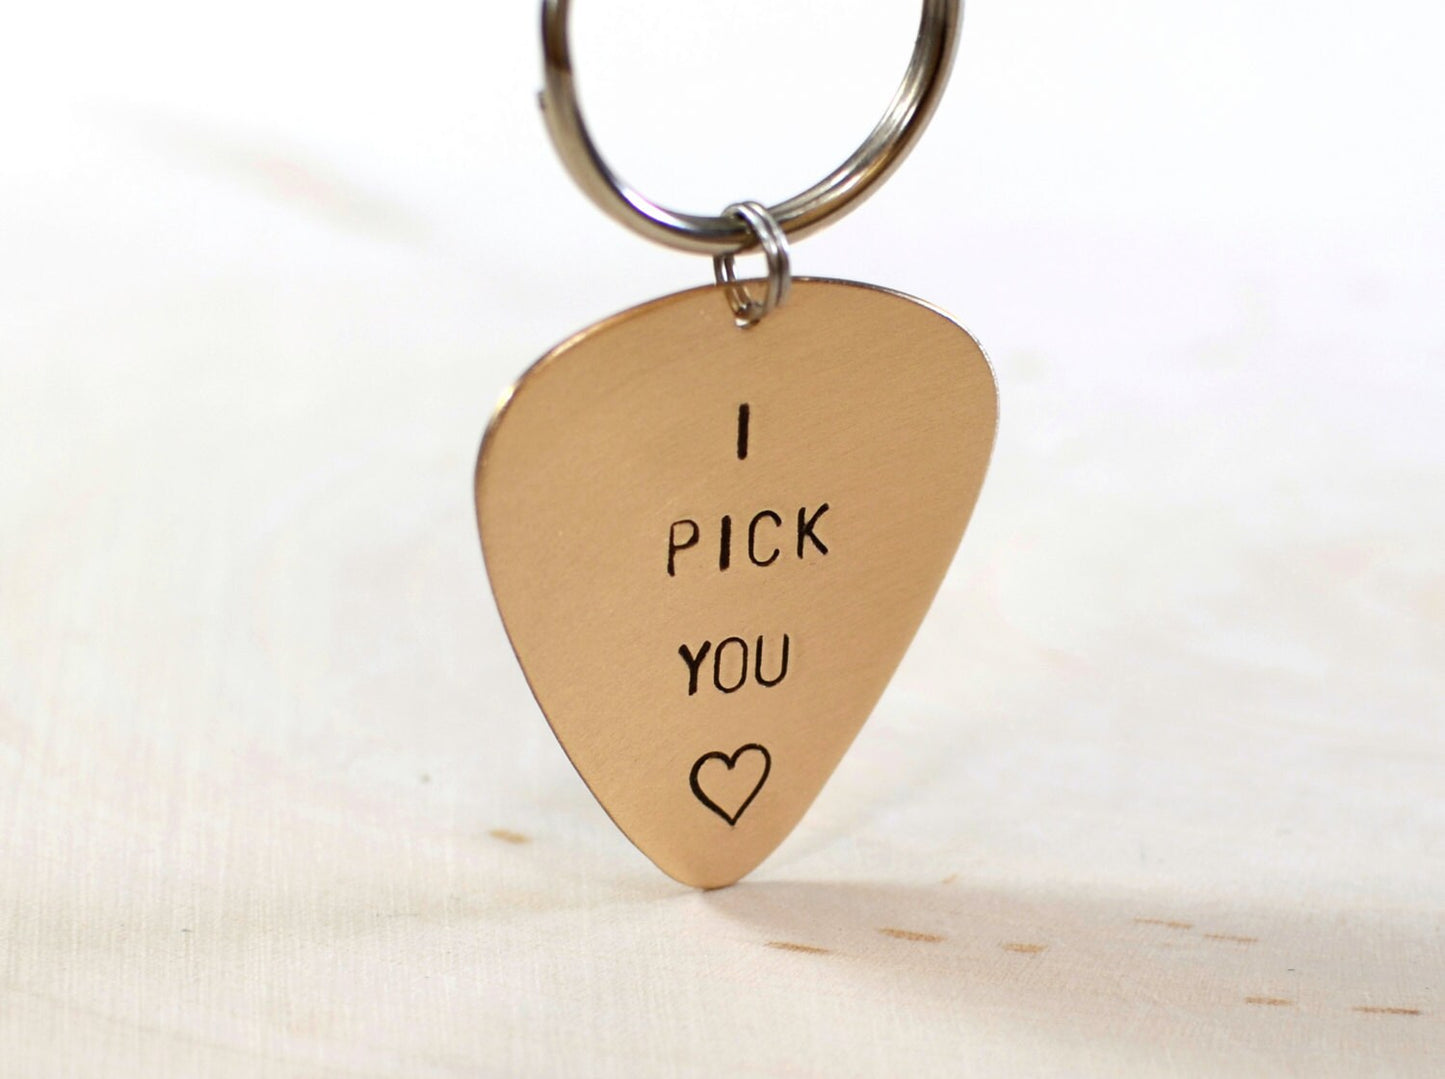 Bronze guitar pick keychain stamped with I PICK YOU